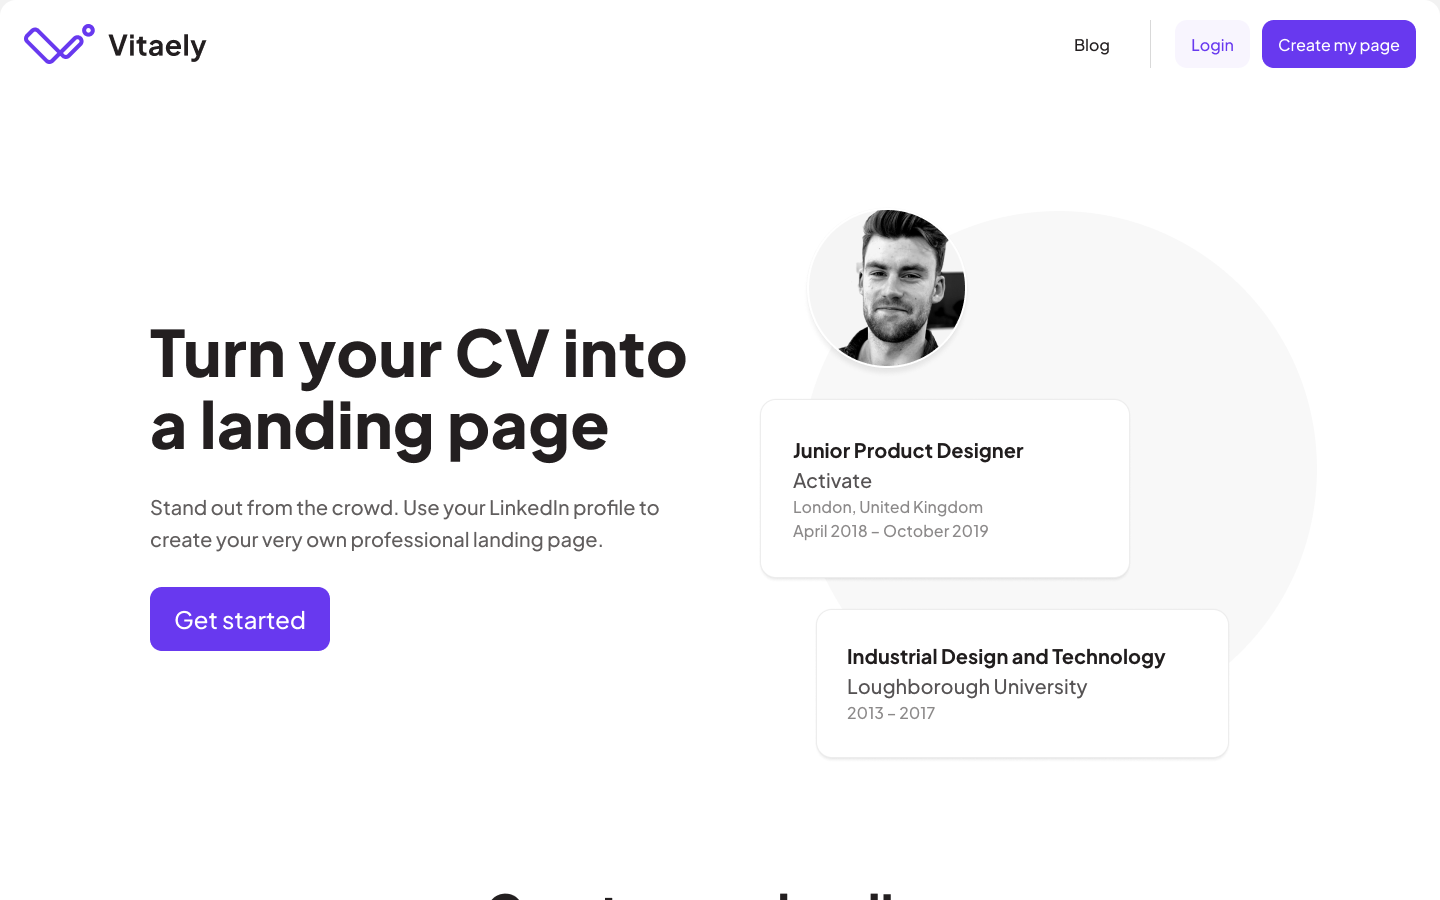 Vitaely landing page: Variant A